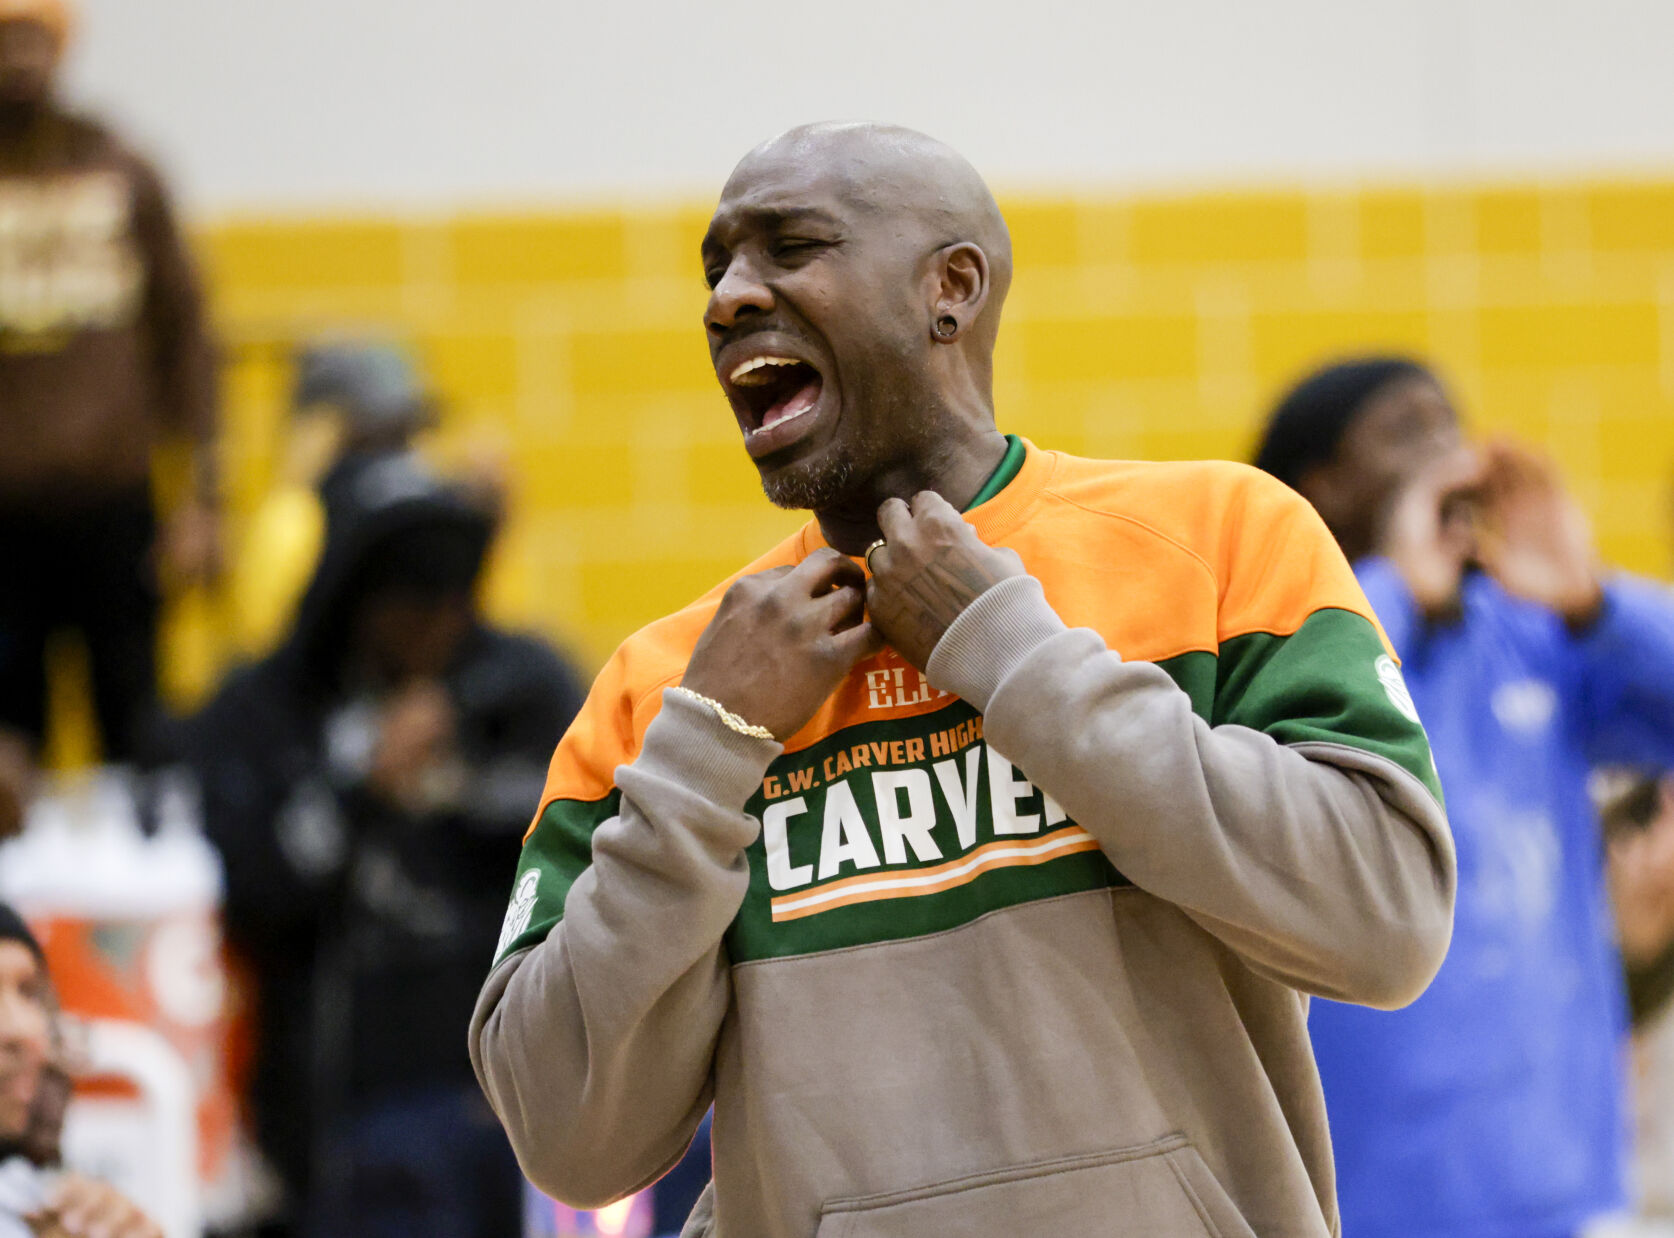 Carver Boys Basketball Dominates Lafayette Christian with Strong Defense and Strategic Plays